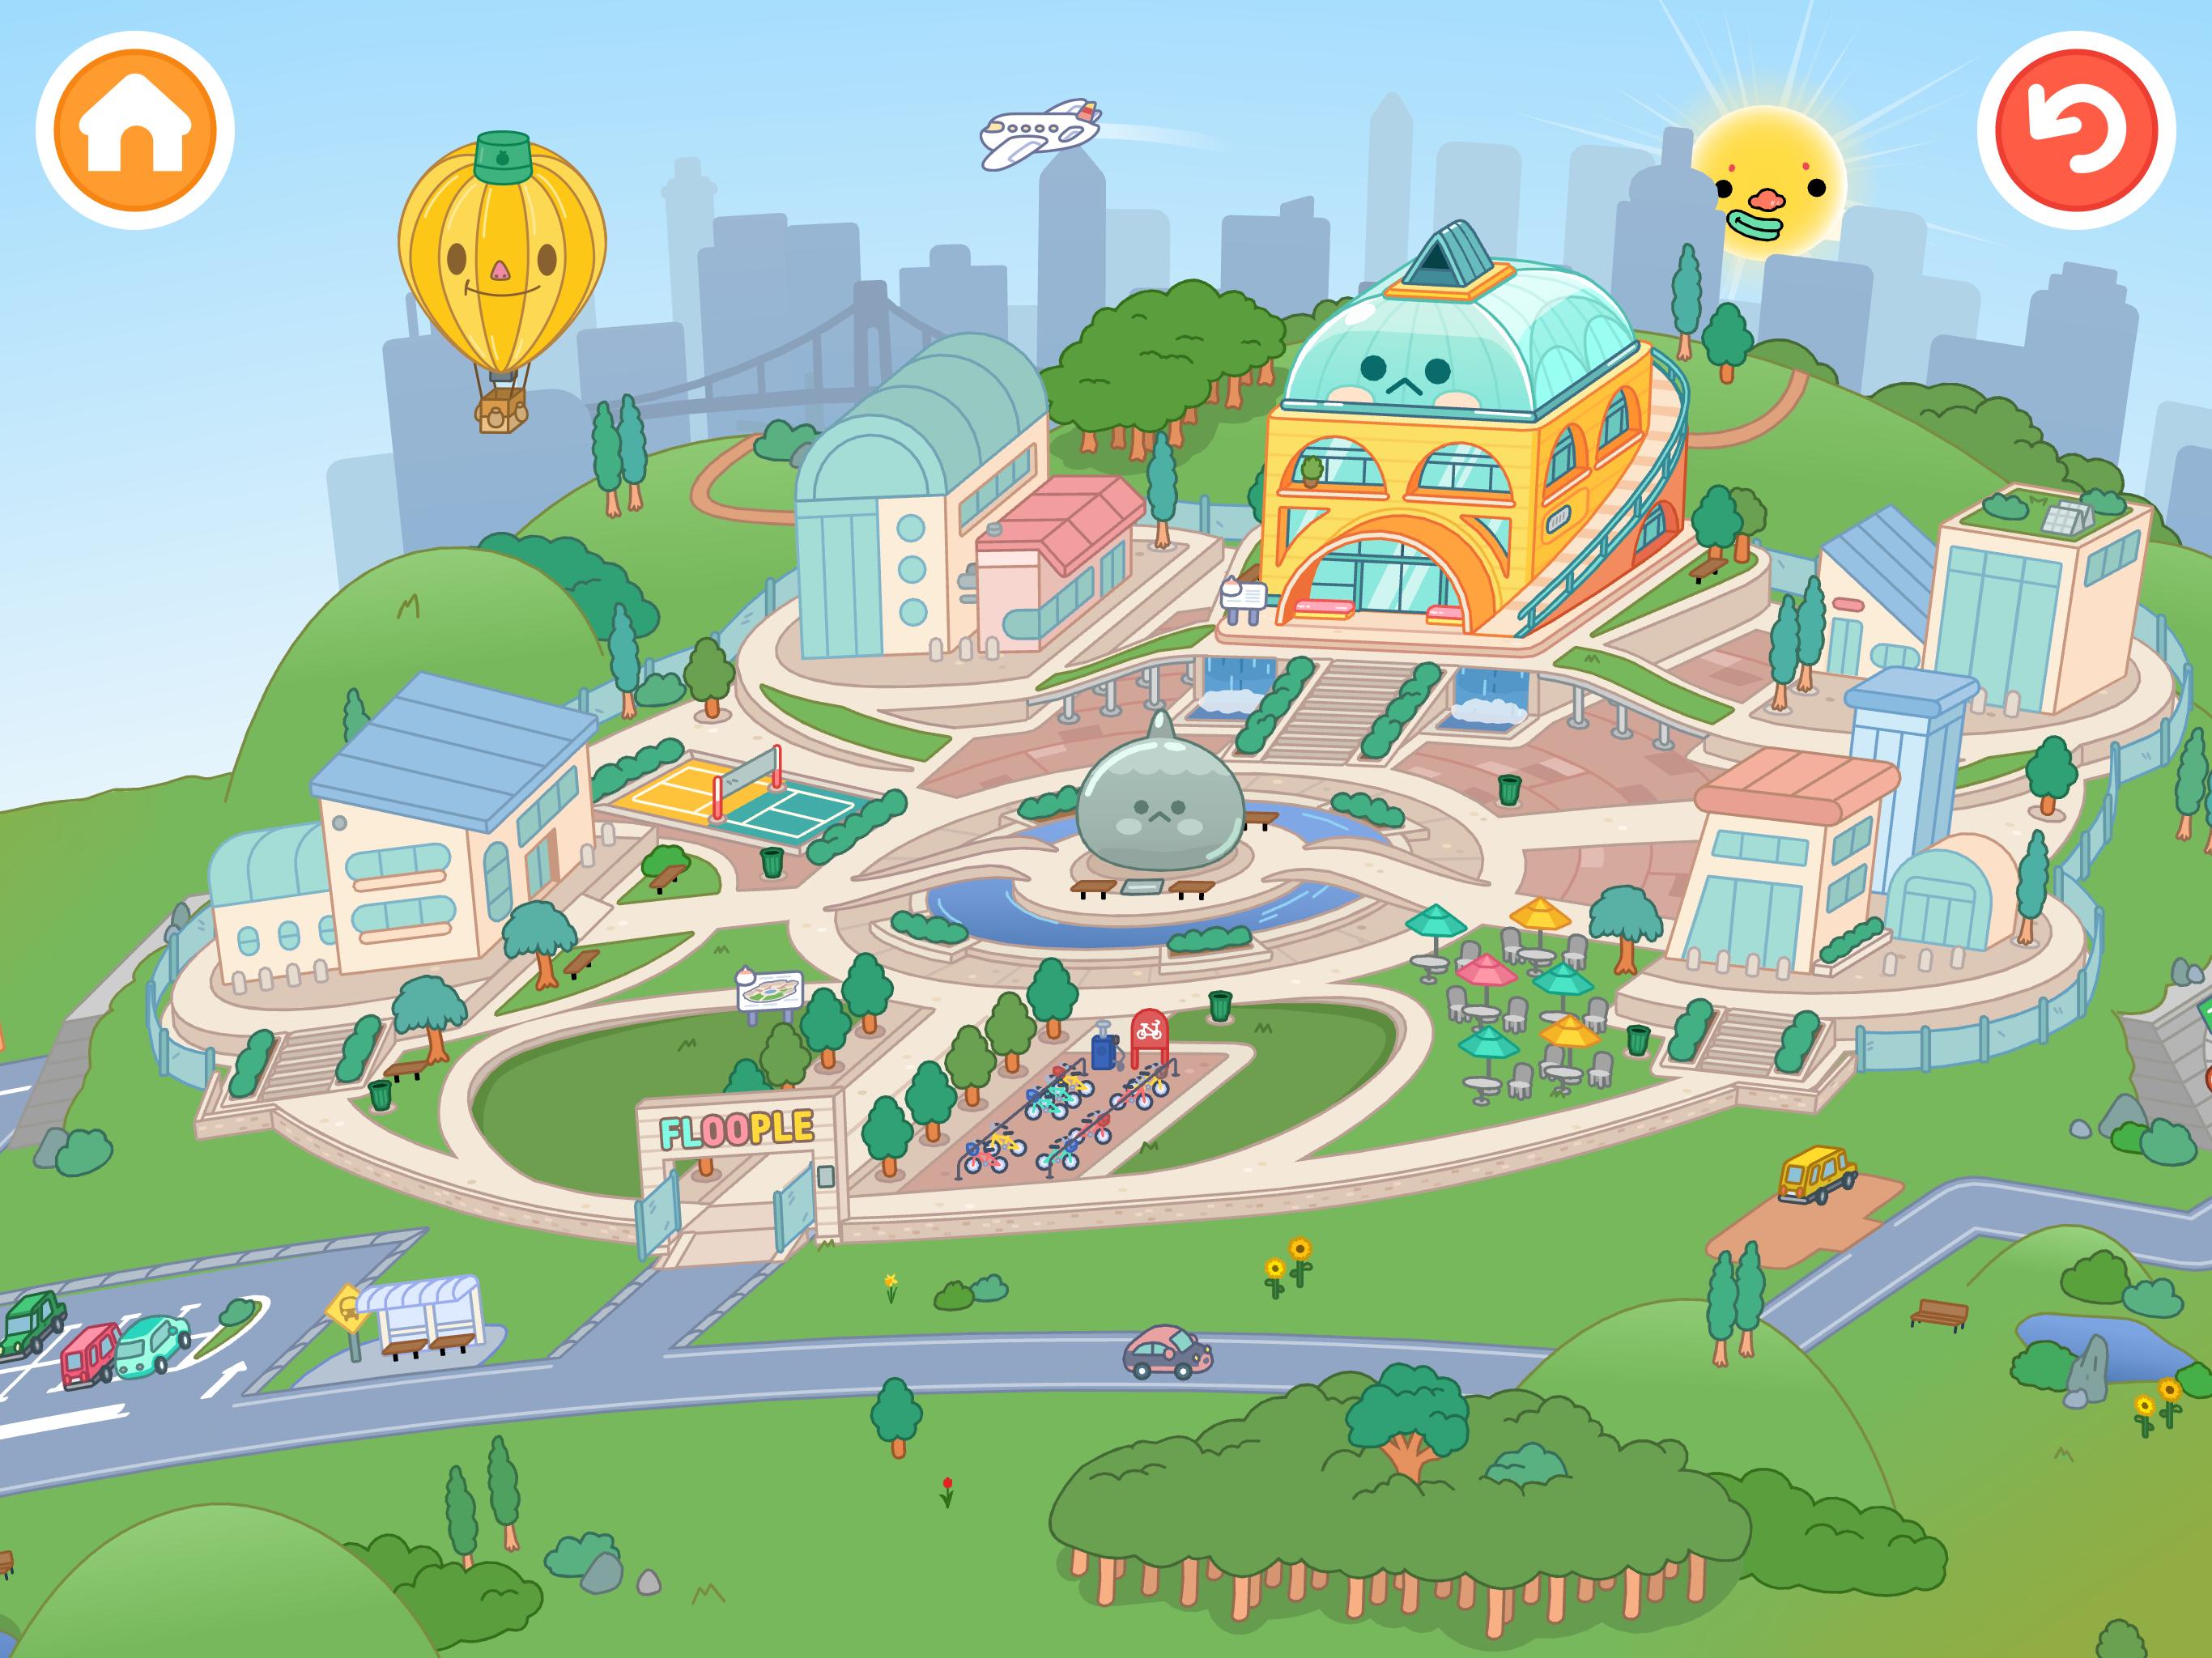 Toca Life: World for Android - APK Download